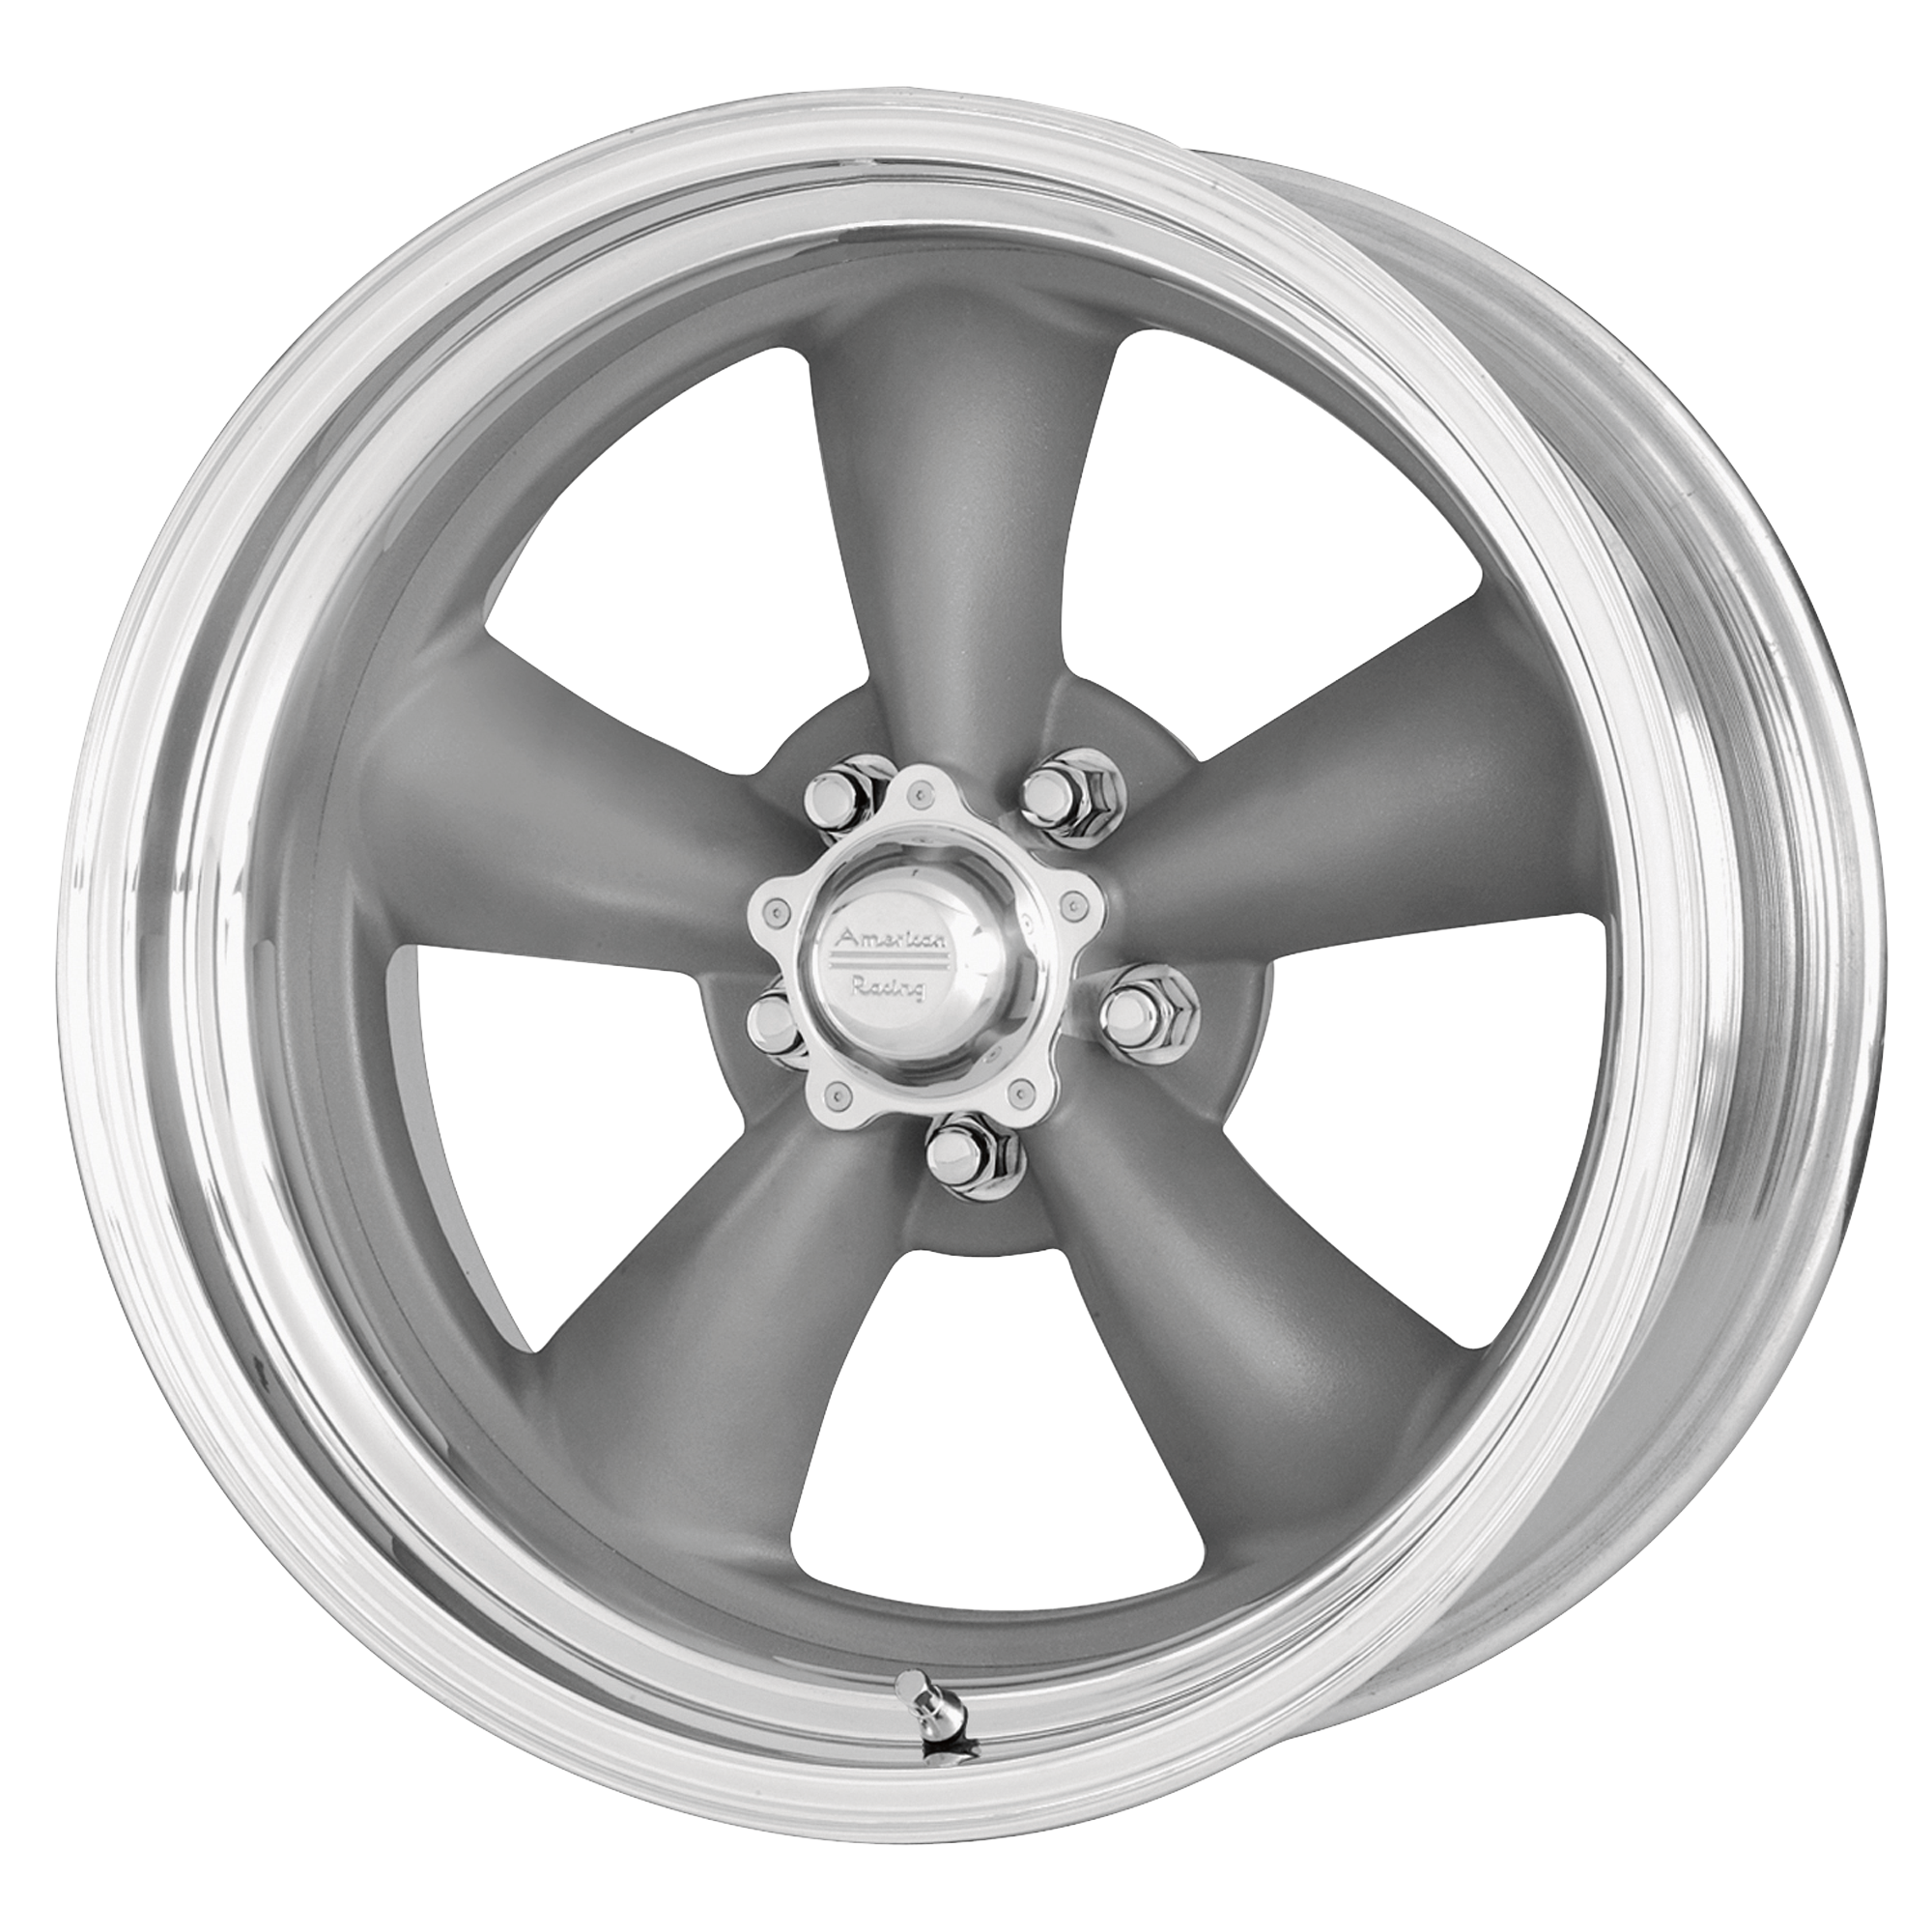 CLASSIC TORQ THRUST II ONE PIECE 14x7 5x120.65 MAG GRAY W/ MACHINED LIP (0 mm) - Tires and Engine Performance